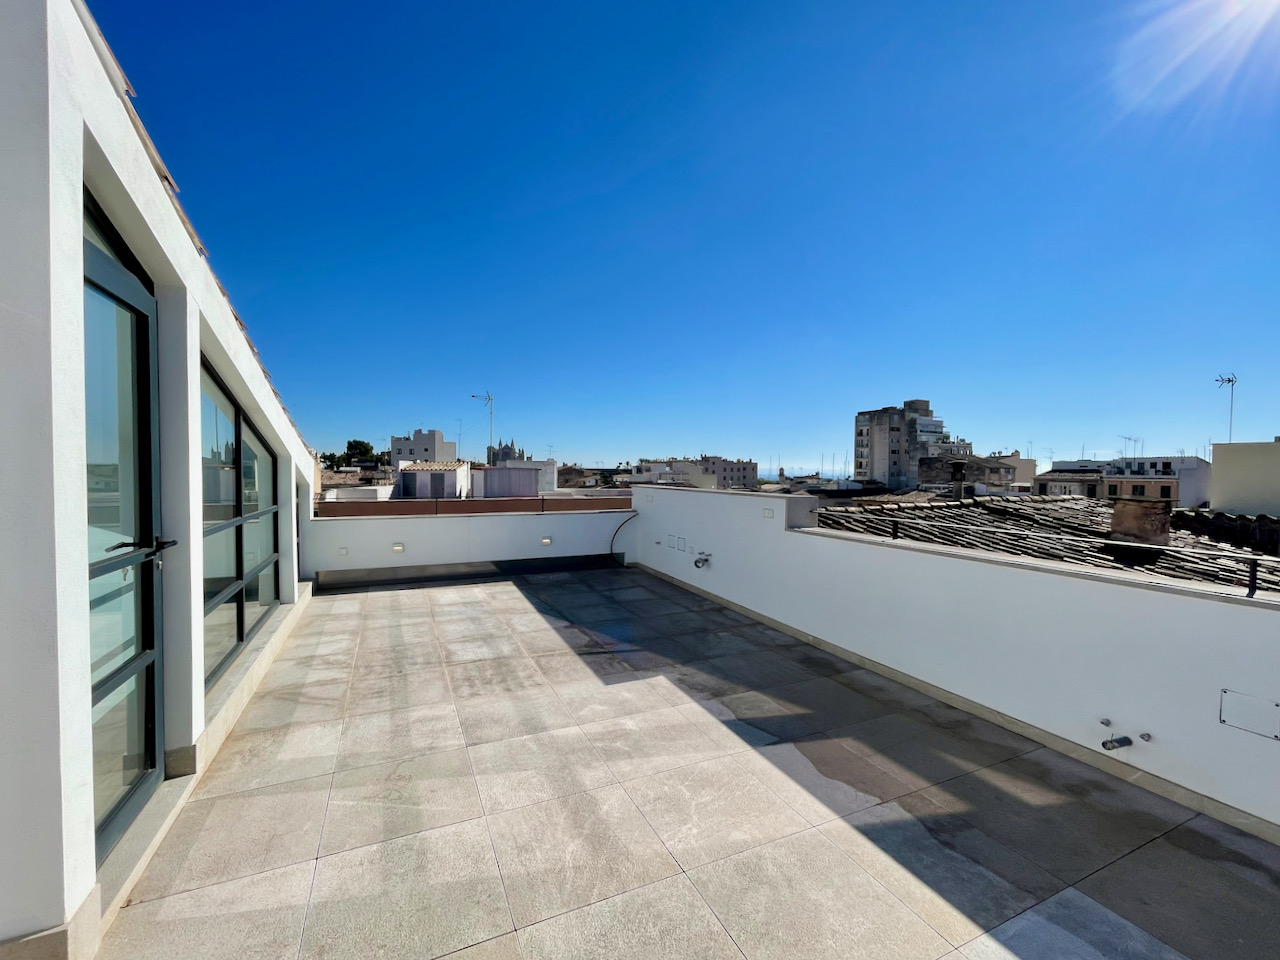 Townhouse with terrace and parking in Santa Catalina, Palma.